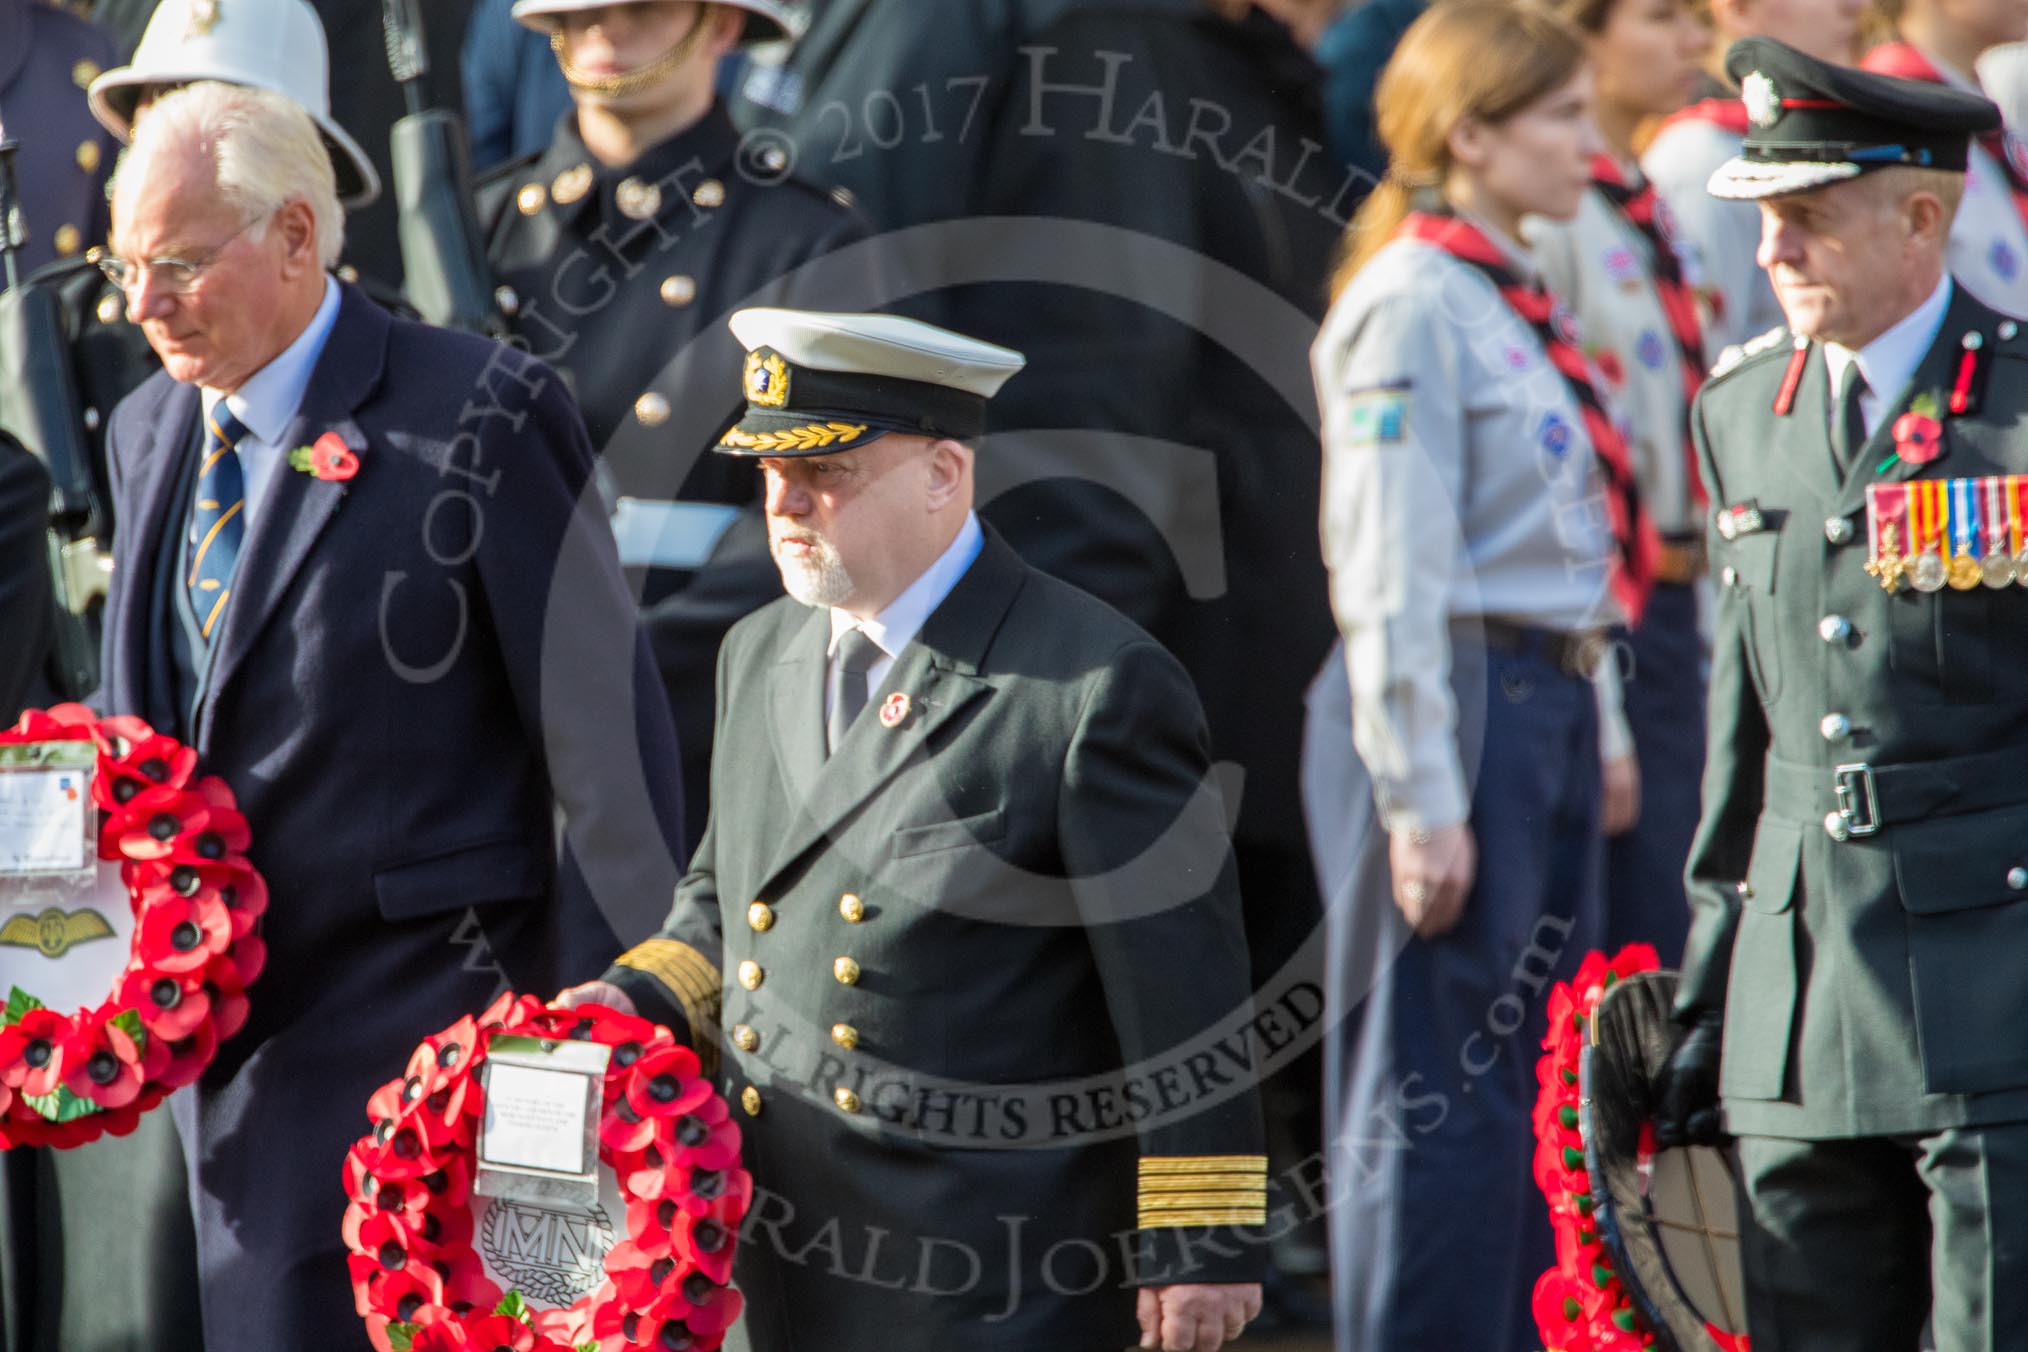 Mr Christopher Garrod, Air Transport Auxiliary Association , Captain David Johnstone, Merchant Navy, and General Mark Carleton­Smith OBE, Chief of the General Staff (?) with their wreaths at the Cenotaph during the Remembrance Sunday Cenotaph Ceremony 2018 at Horse Guards Parade, Westminster, London, 11 November 2018, 10:55.